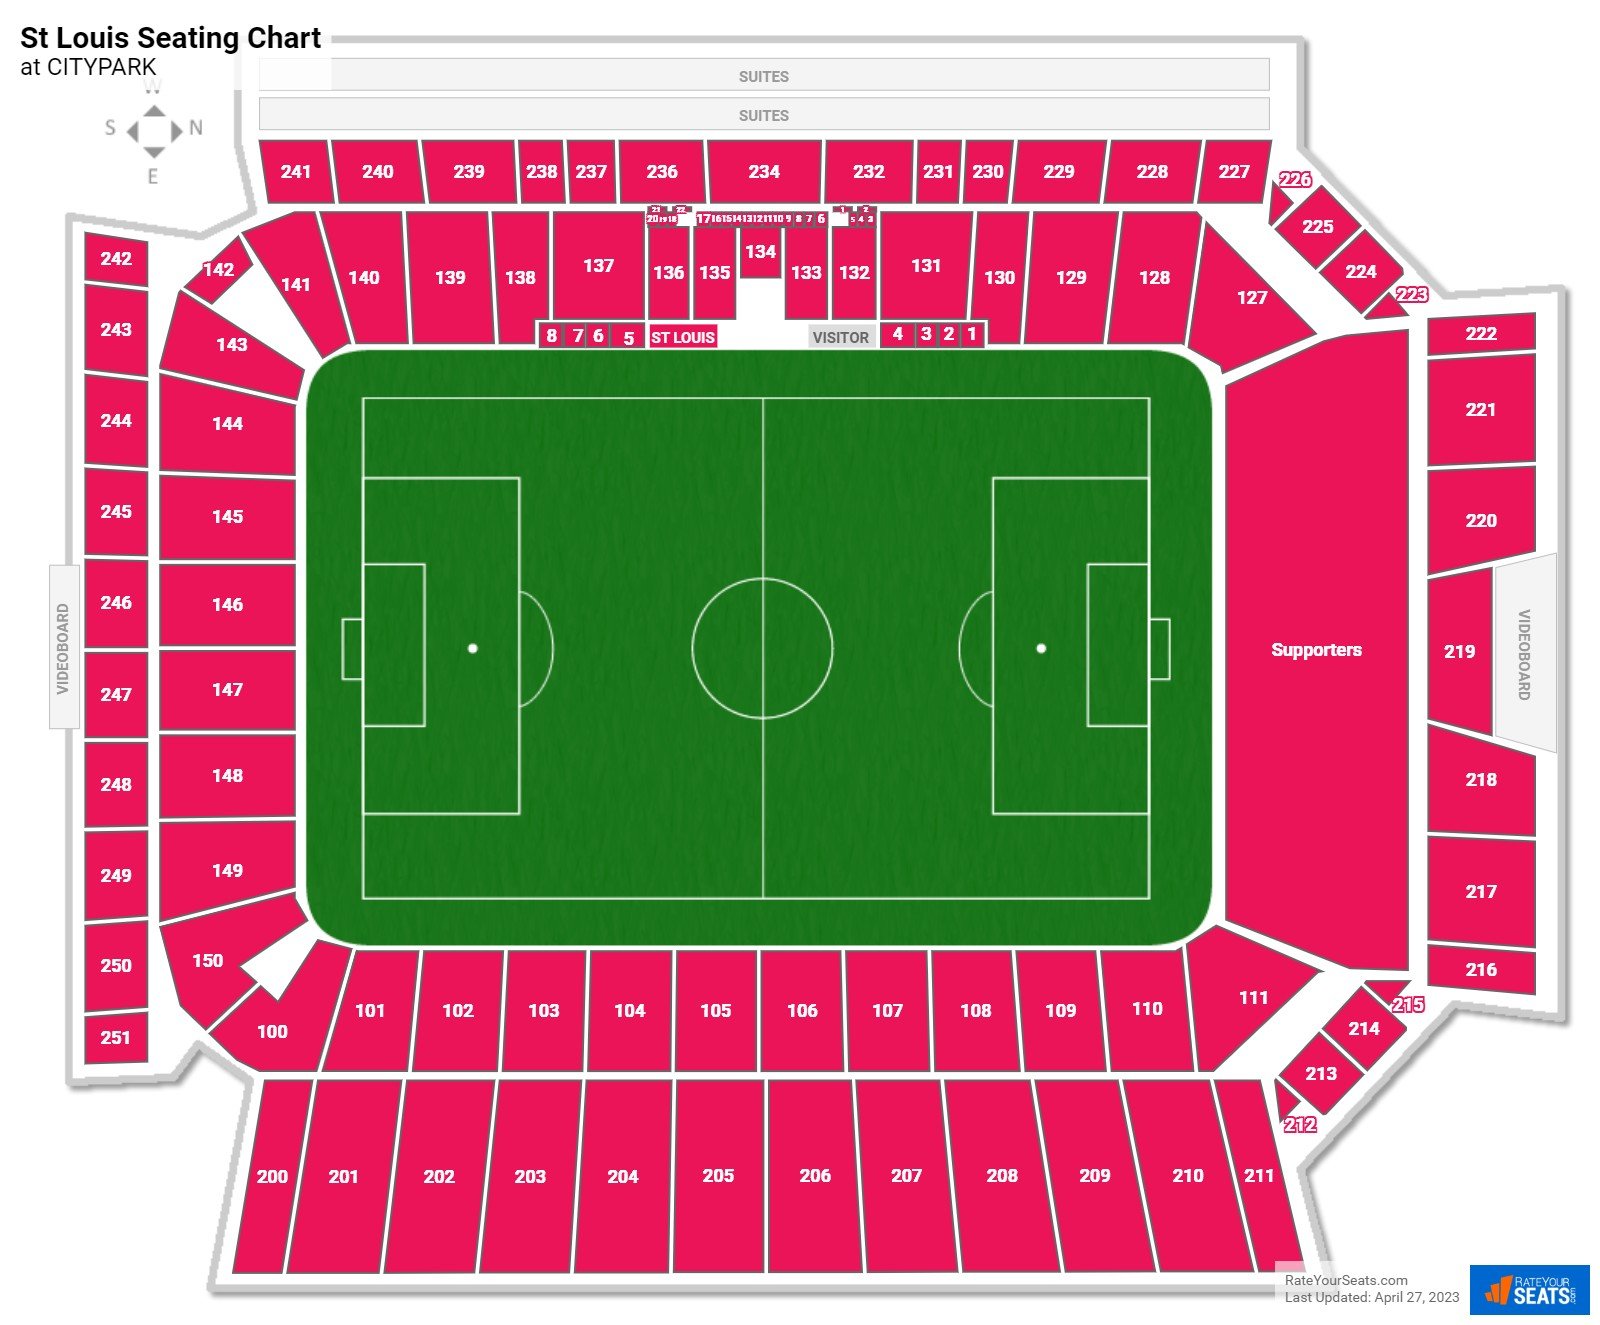 St Louis City SC Seating Chart at CITYPARK